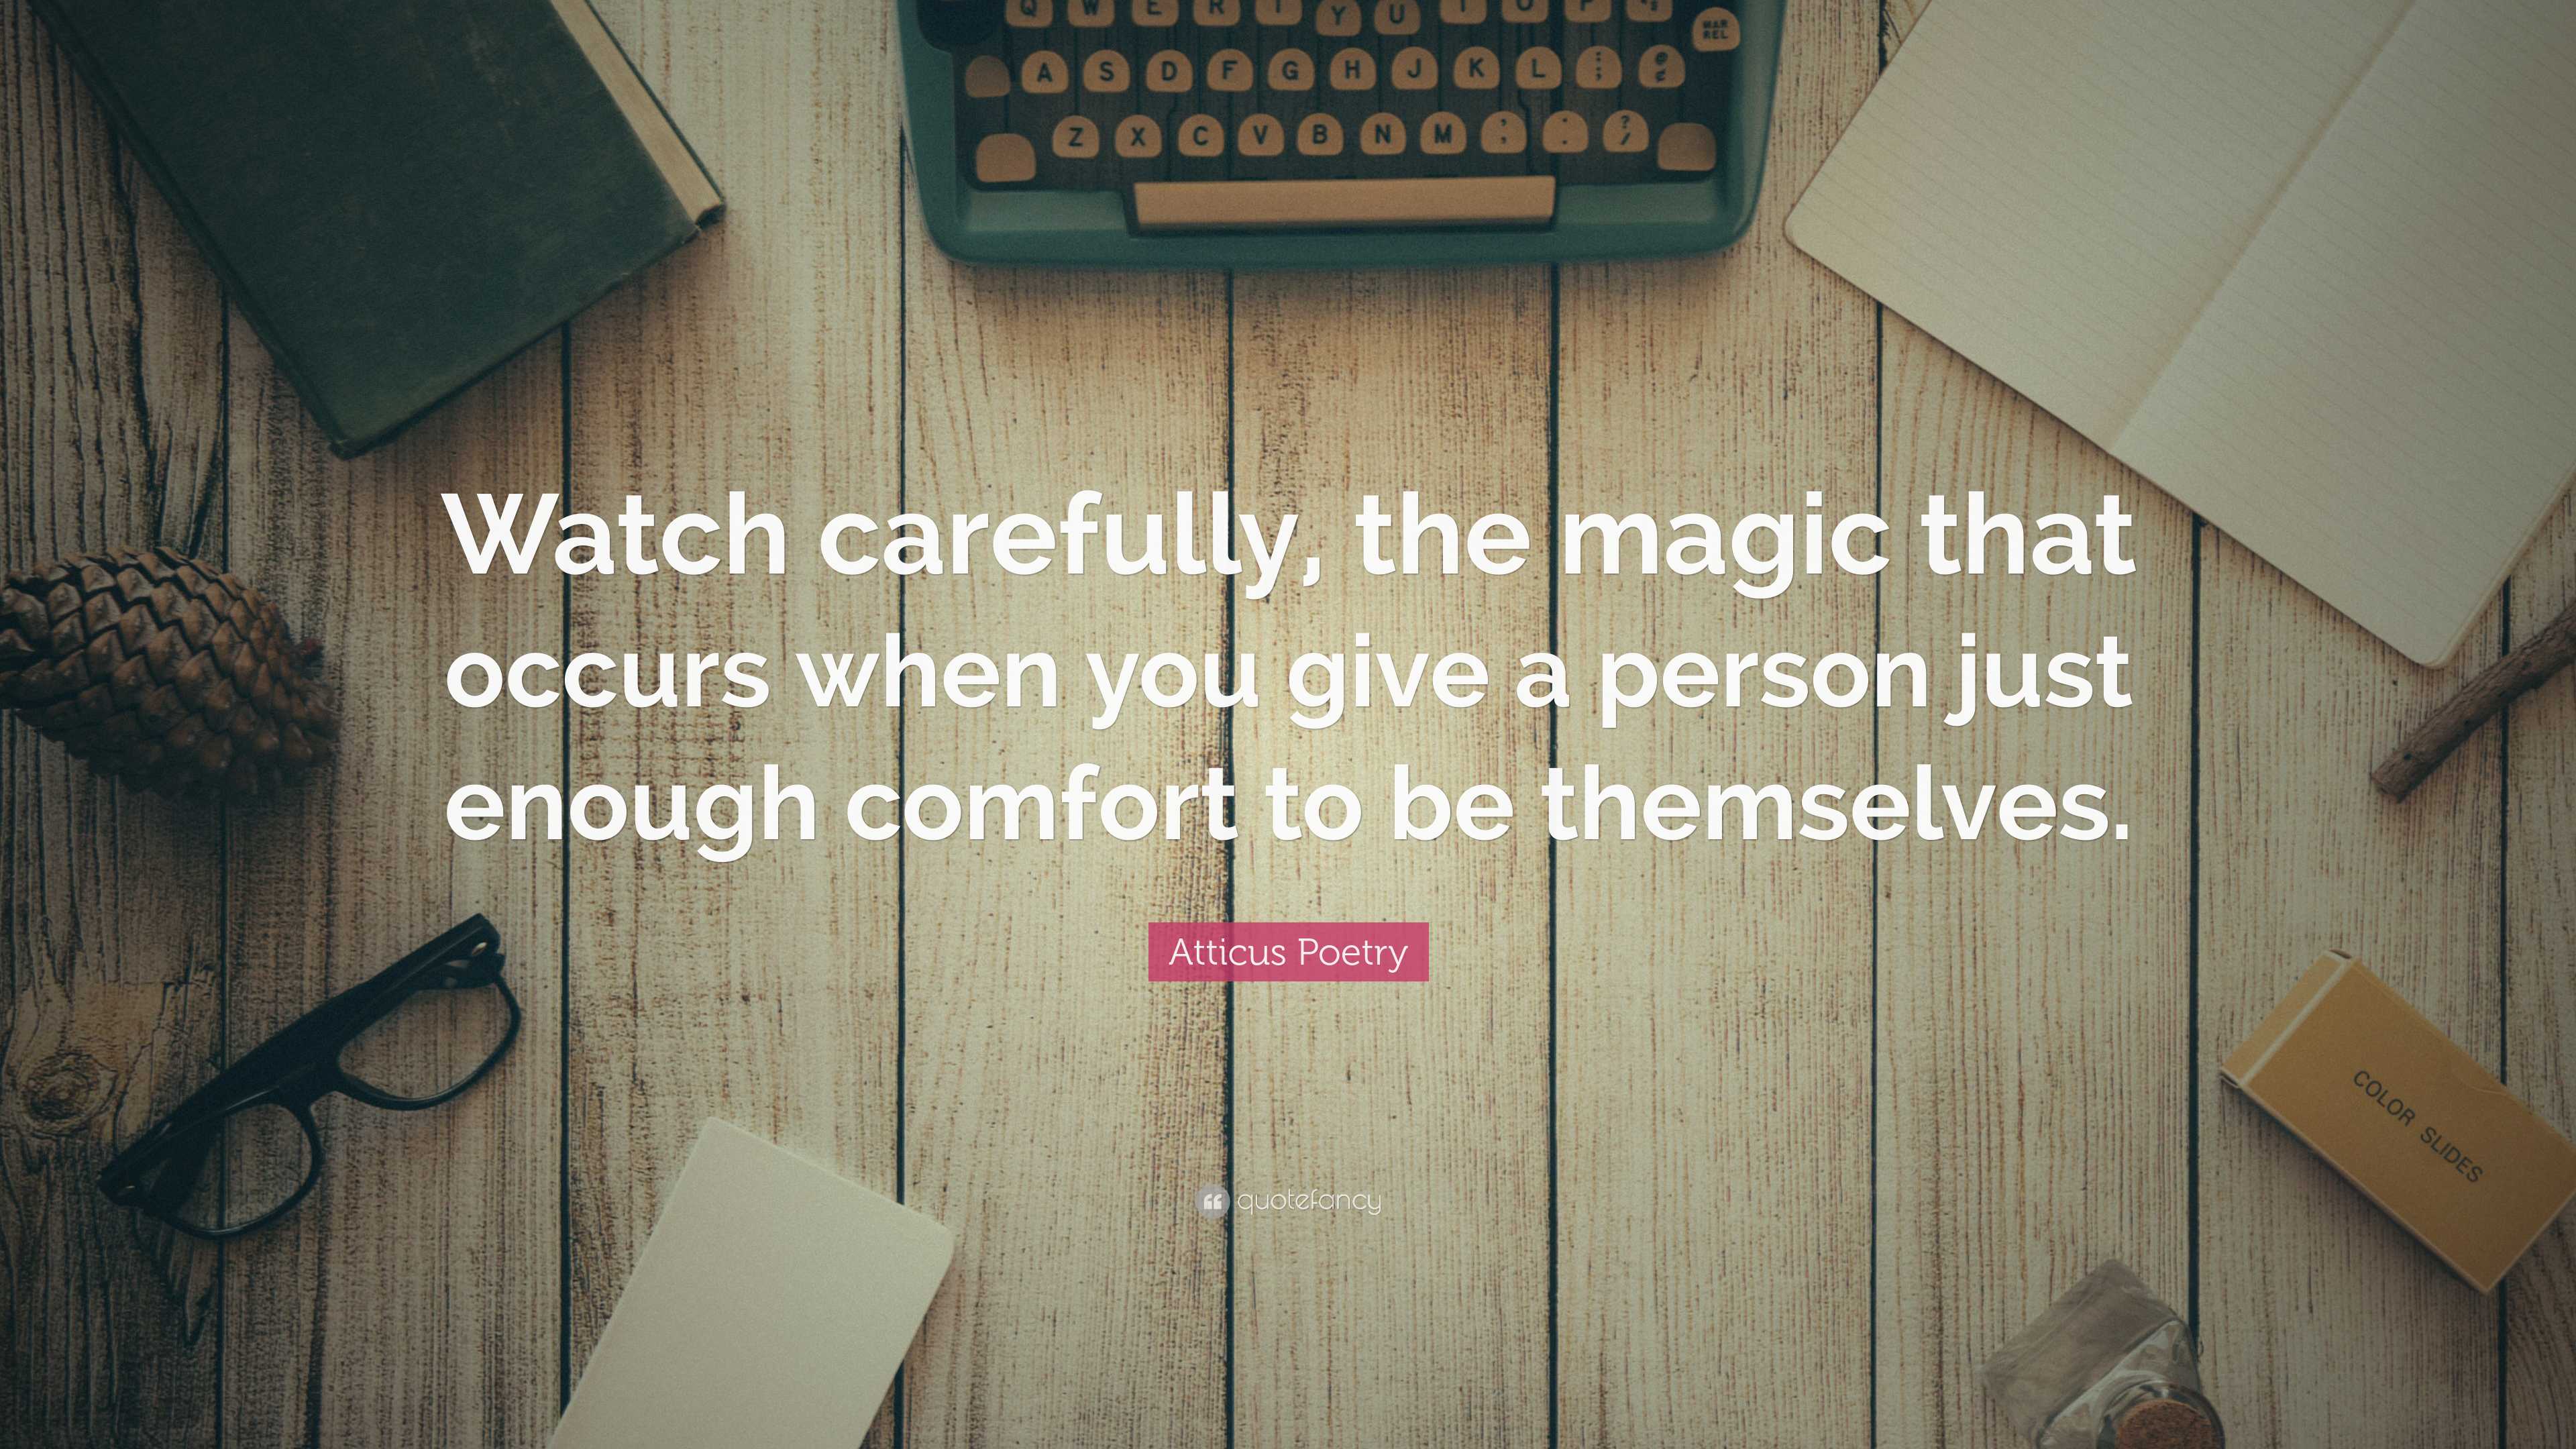 7850018 Atticus Poetry Quote Watch carefully the magic that occurs when